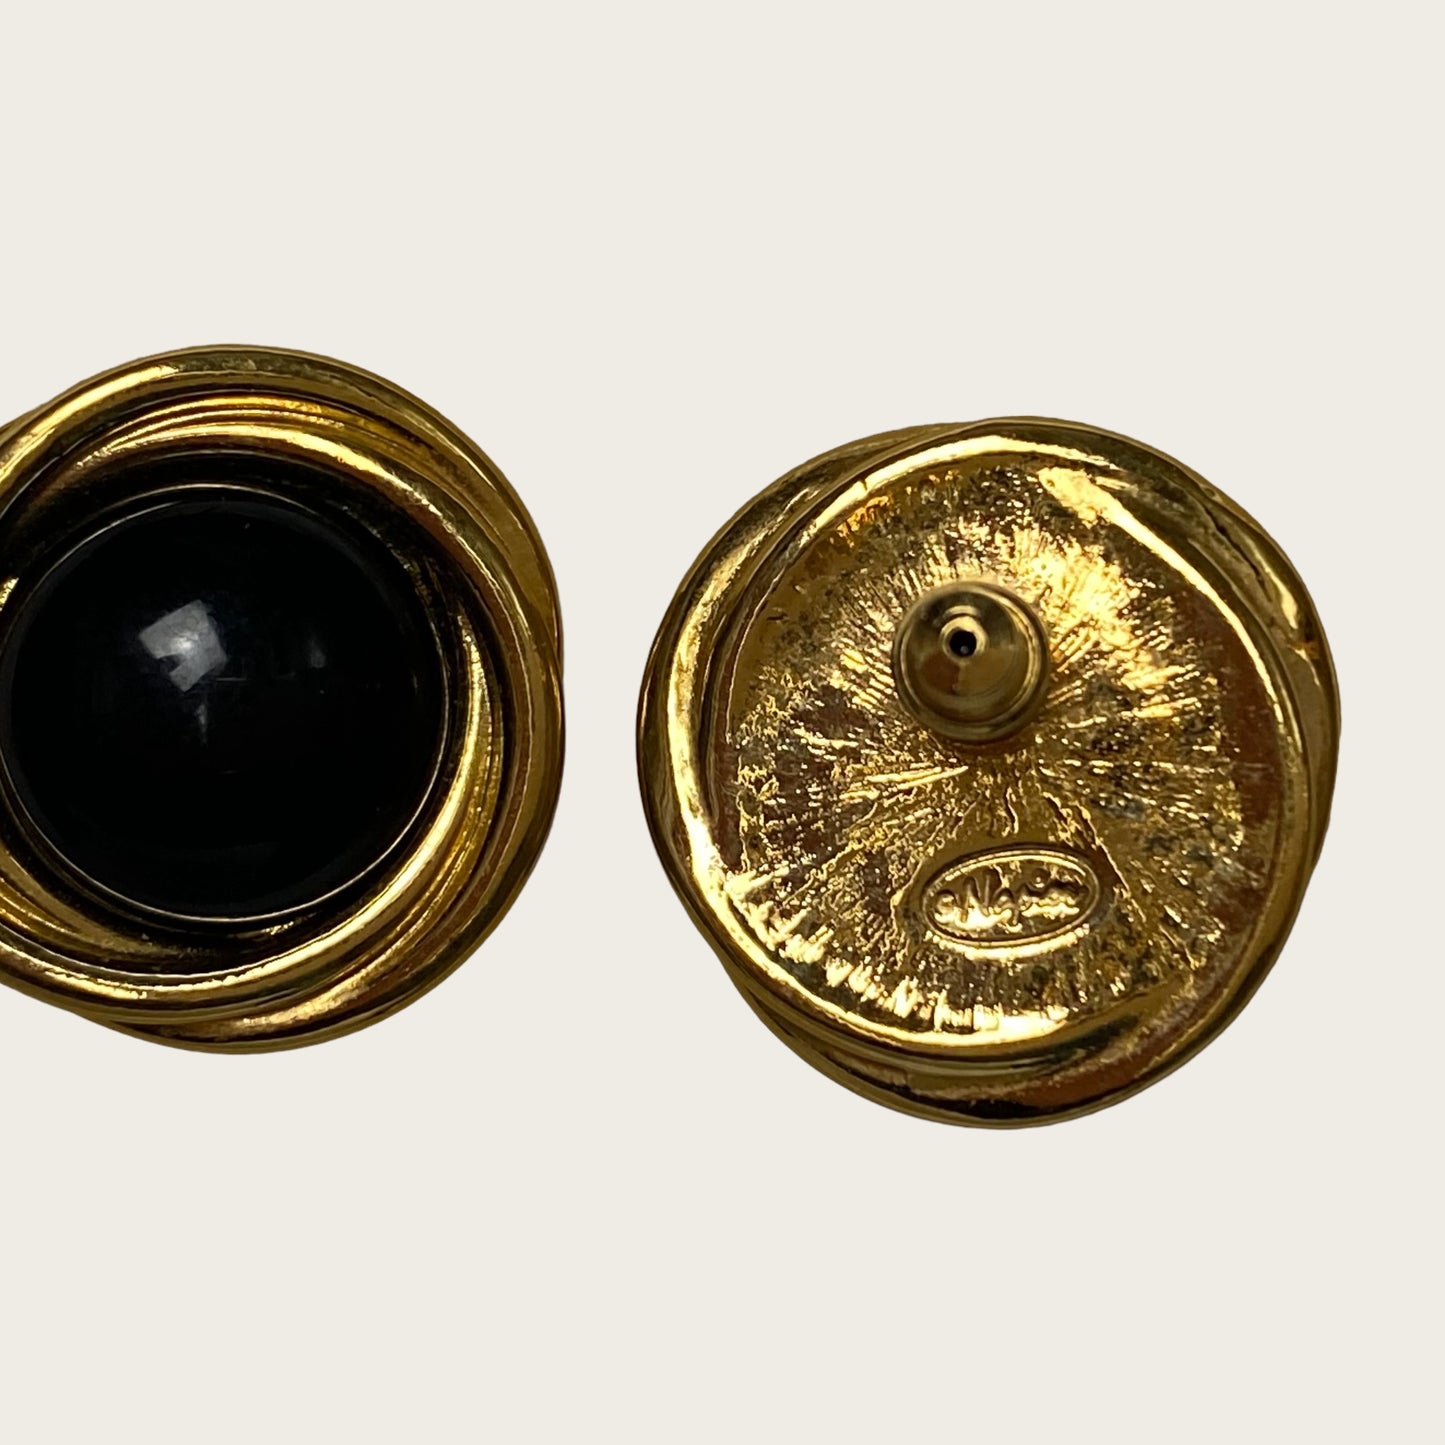 Black and gold platted ‘Napier’ earrings